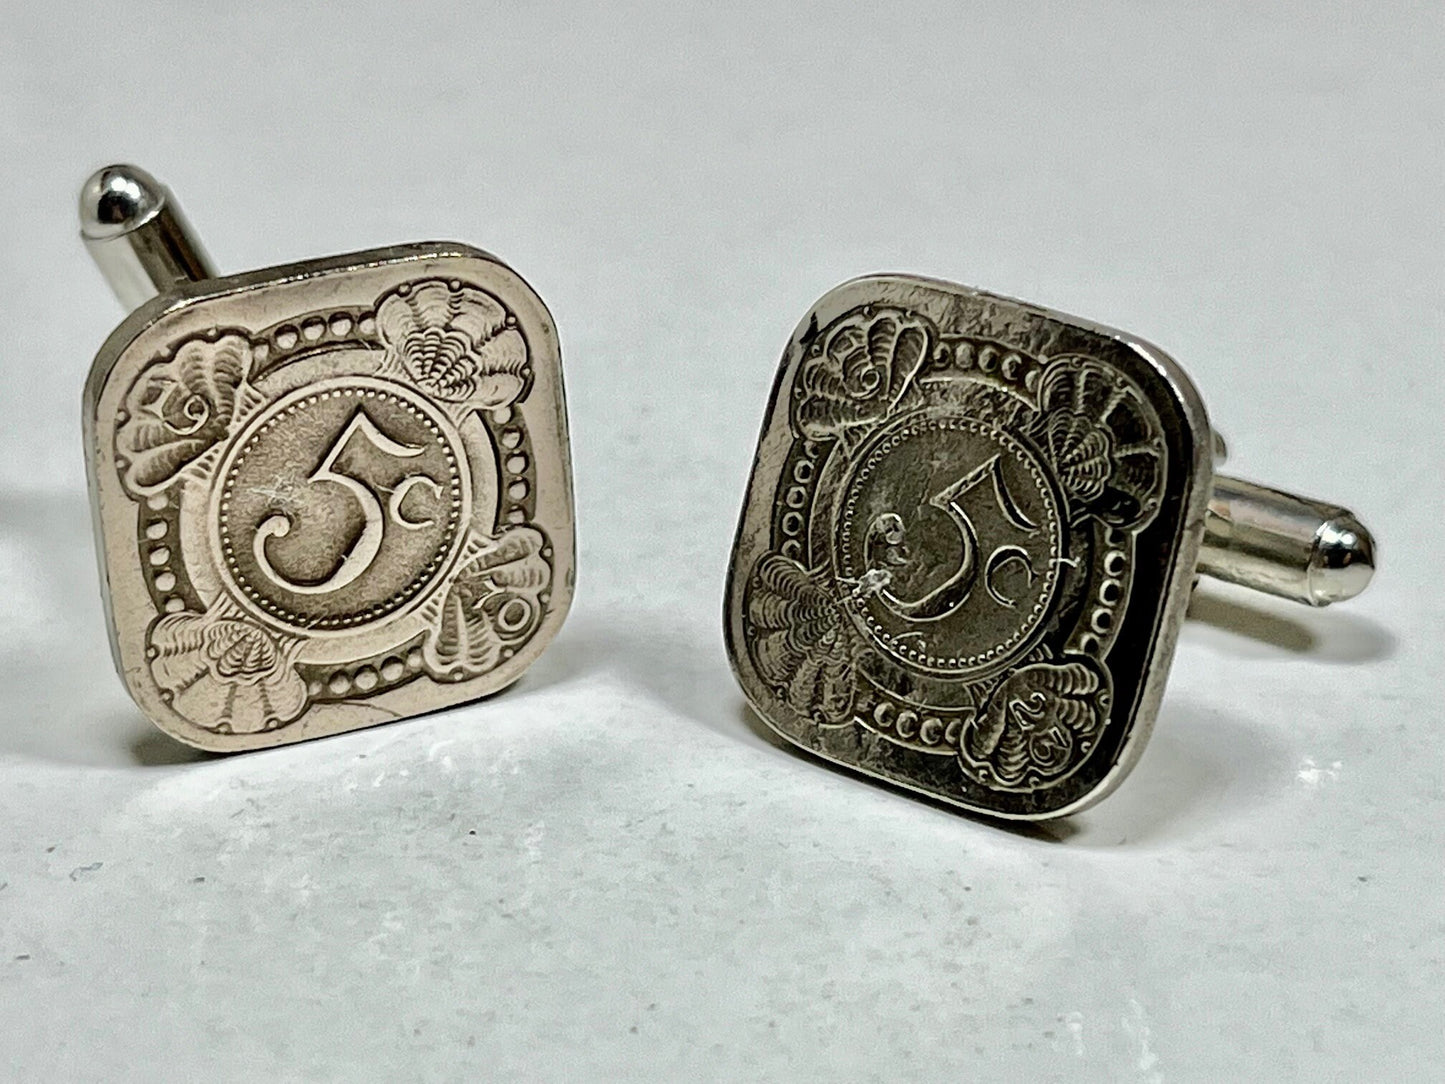 Netherlands Coin Cufflinks, Cuff Links, 5 Cents Vintage Custom Made Rare Coins Coin Enthusiast Fashion Accessory Handmade